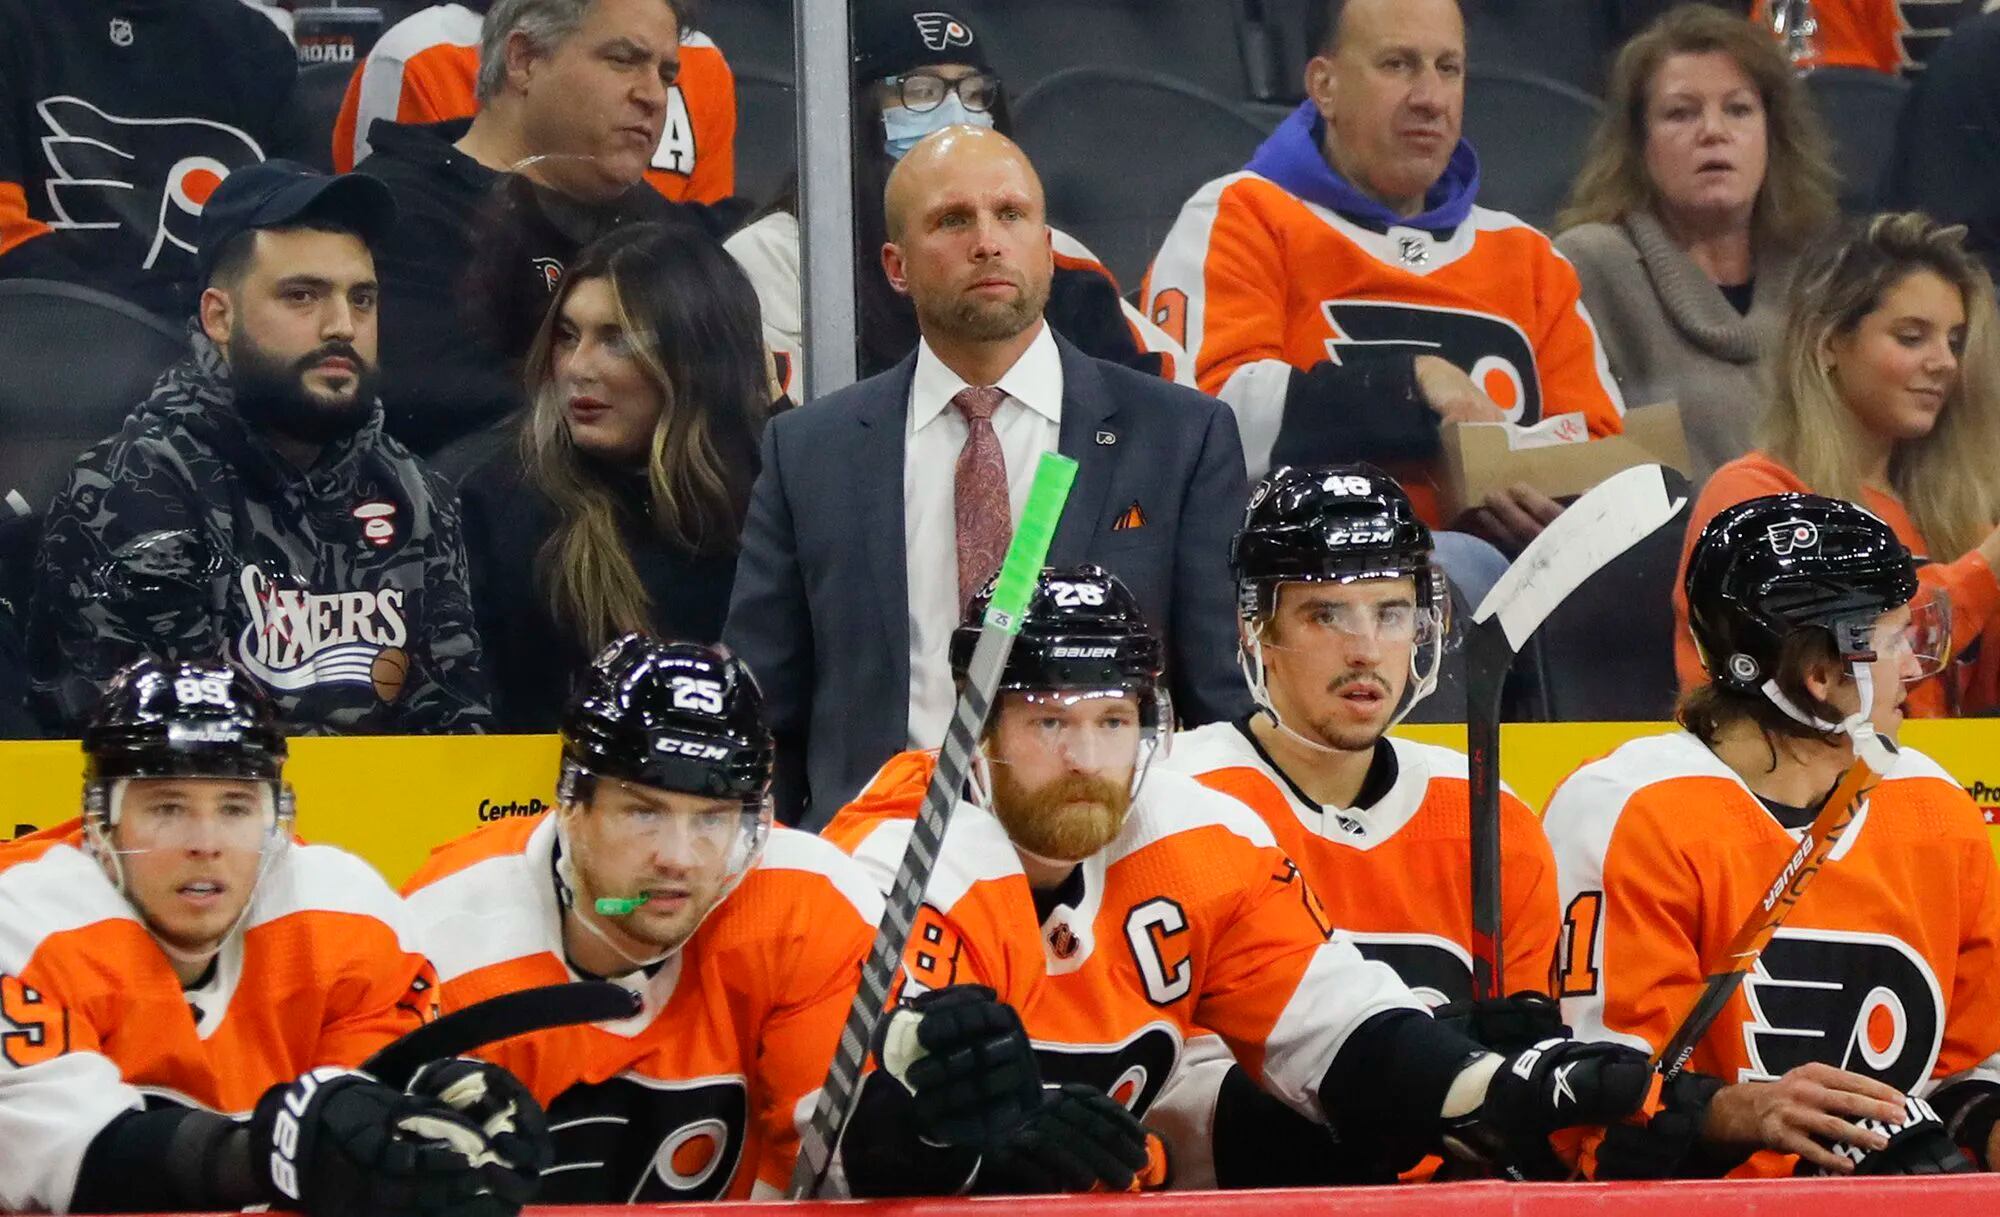 Inside Flyers' decision to sit Keith Yandle, as team's future